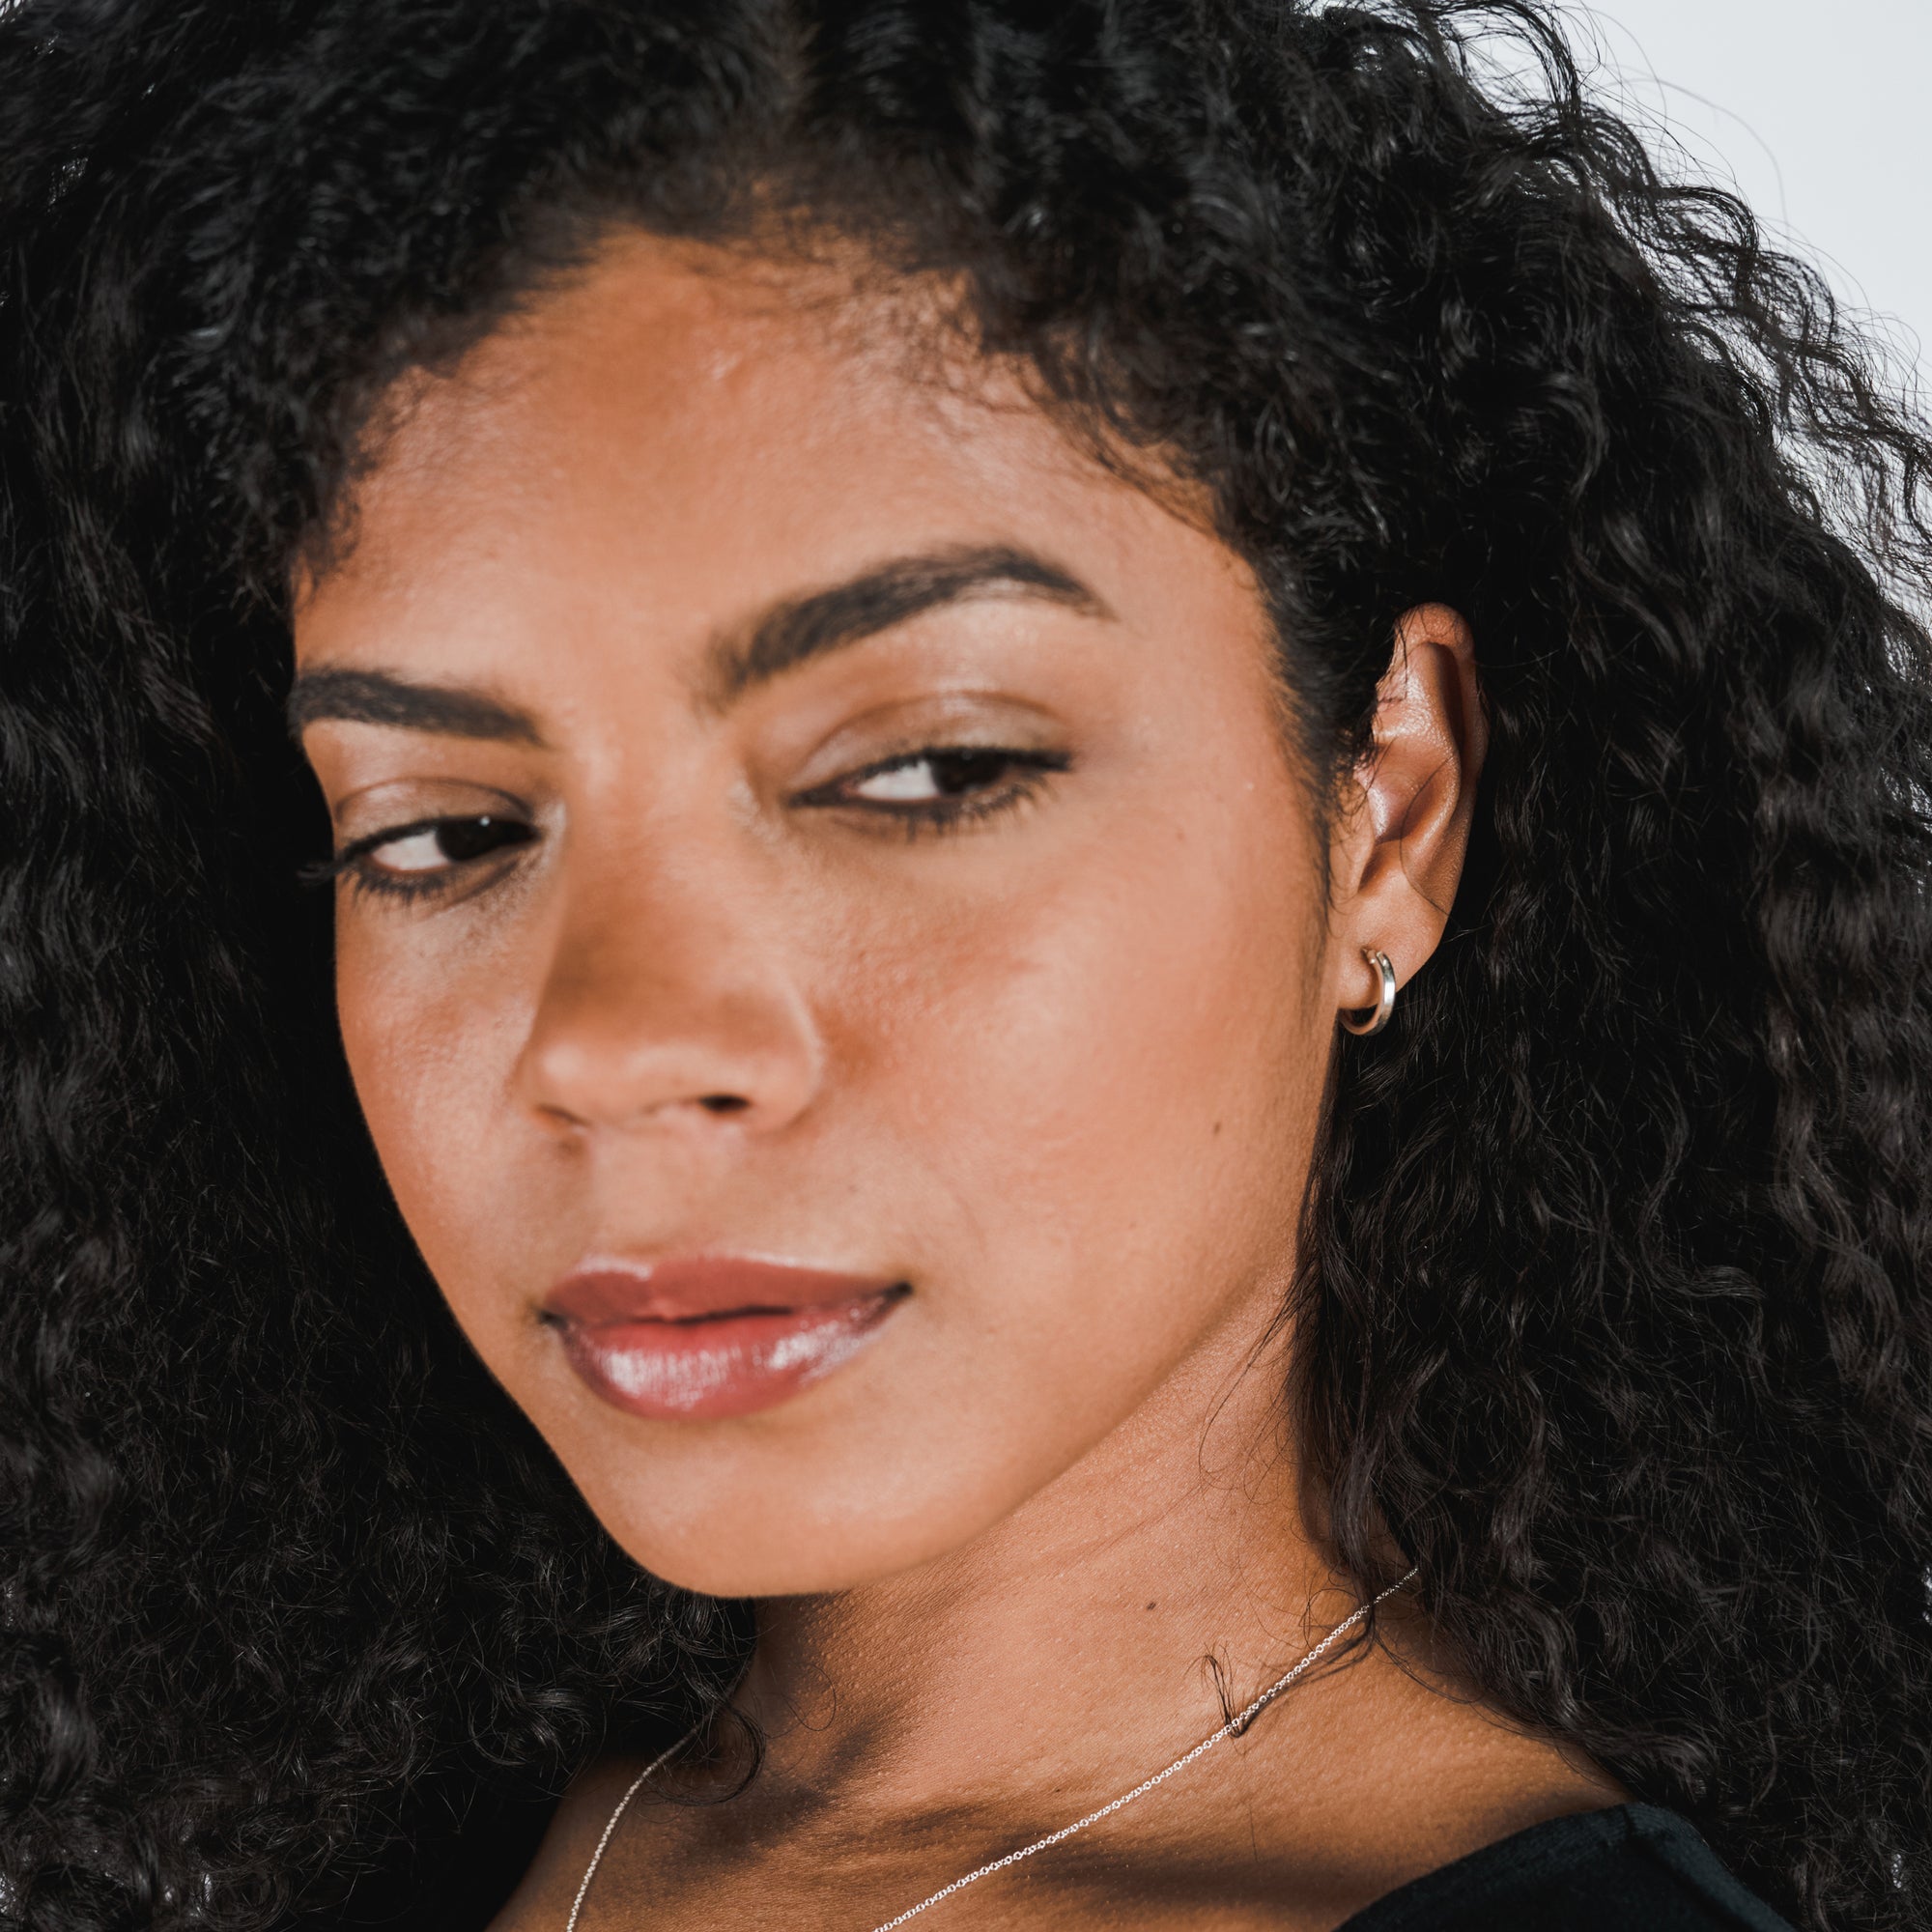 A close-up portrait of a woman with curly hair slightly turning her face to the side, showcasing her Becoming Jewelry Everyday Hoop Earrings in Sterling Silver.